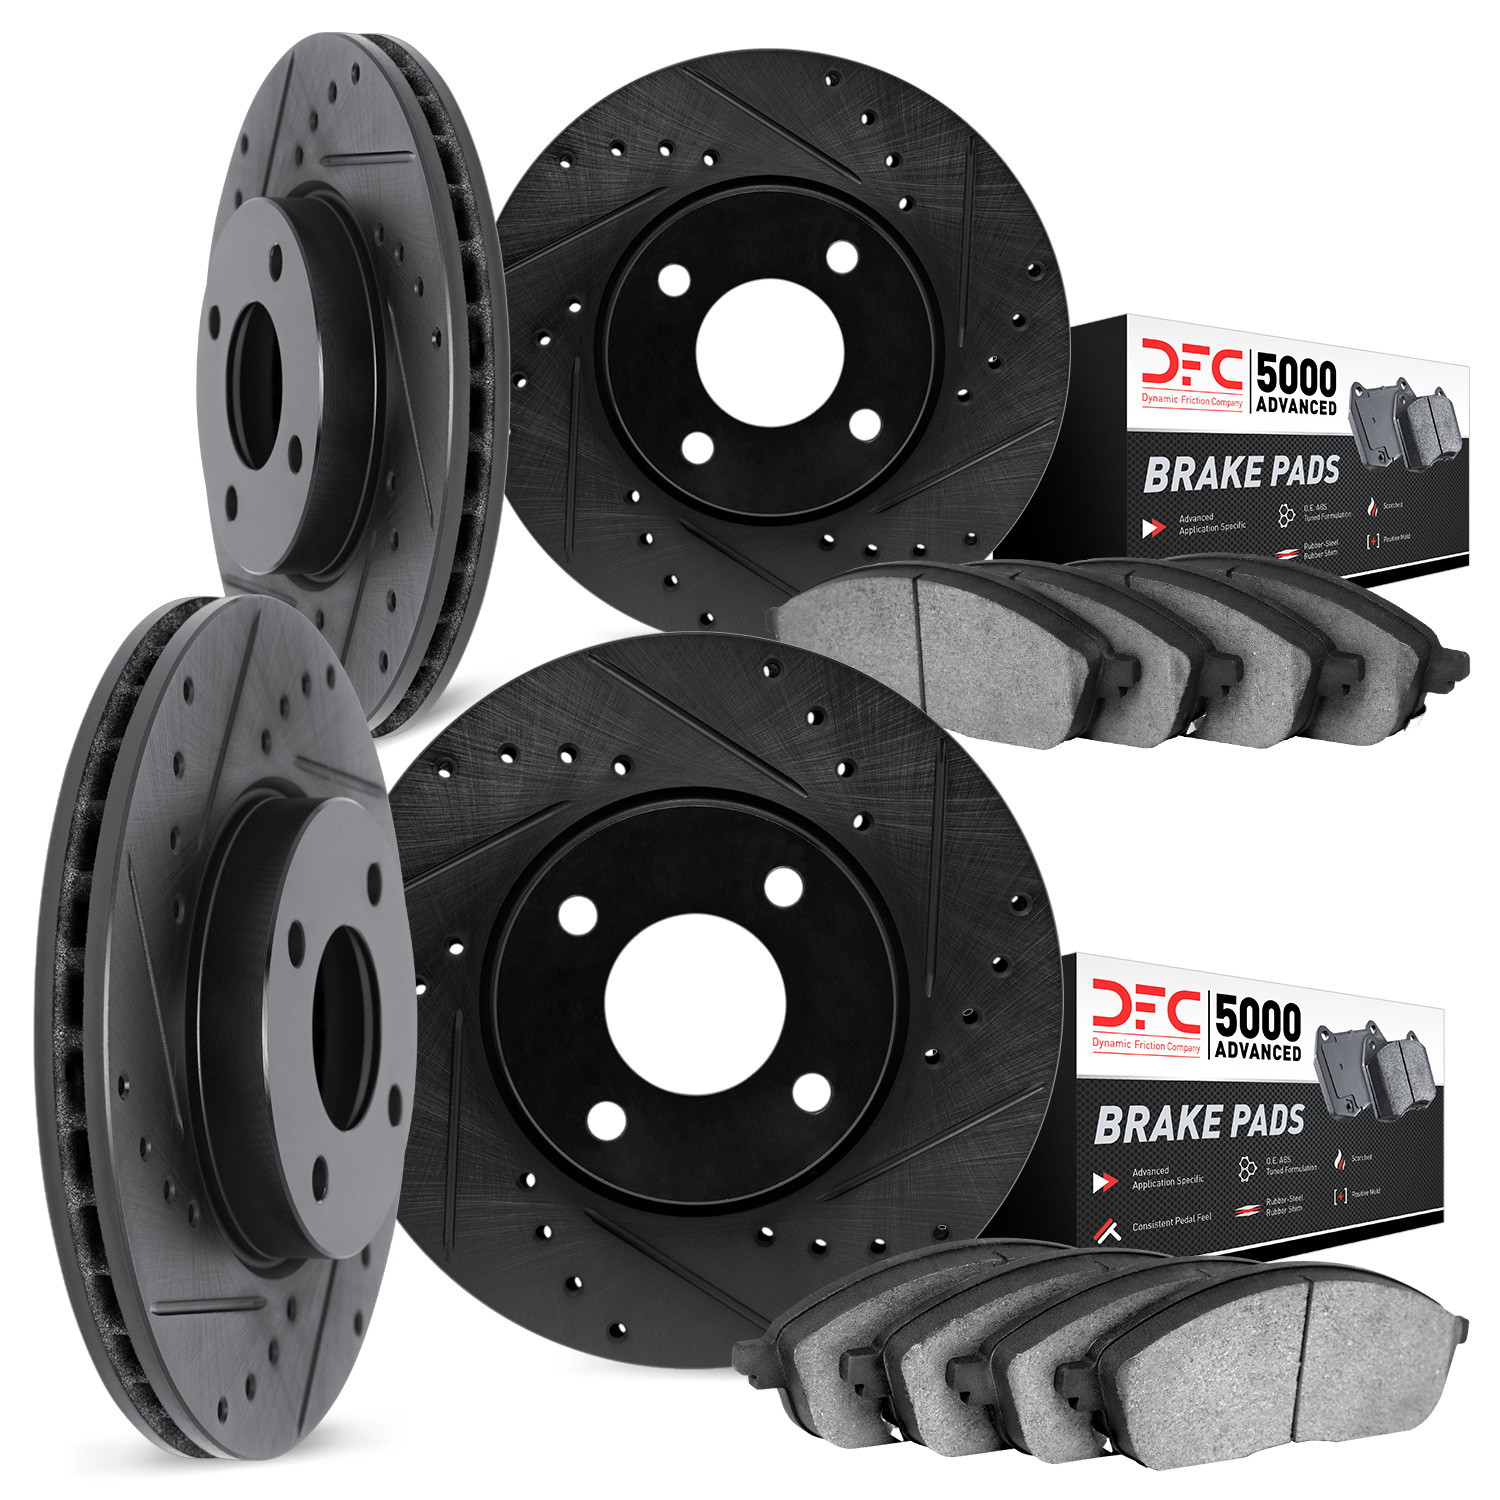 8504-76110 Drilled/Slotted Brake Rotors w/5000 Advanced Brake Pads Kit [Black], 1983-1984 Lexus/Toyota/Scion, Position: Front an